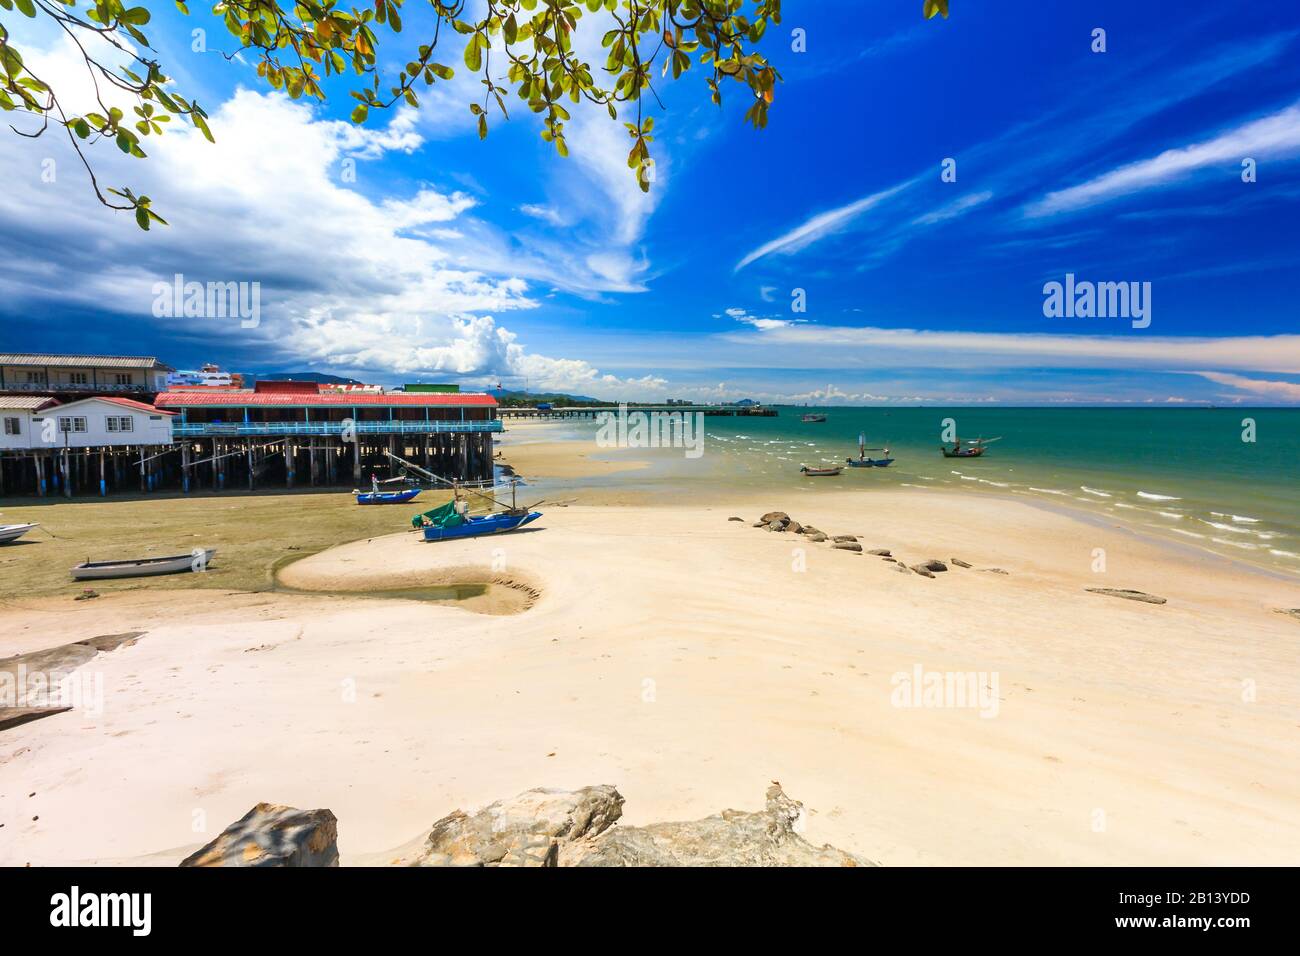 Storm approaching Hua Hin beach from the west Stock Photo